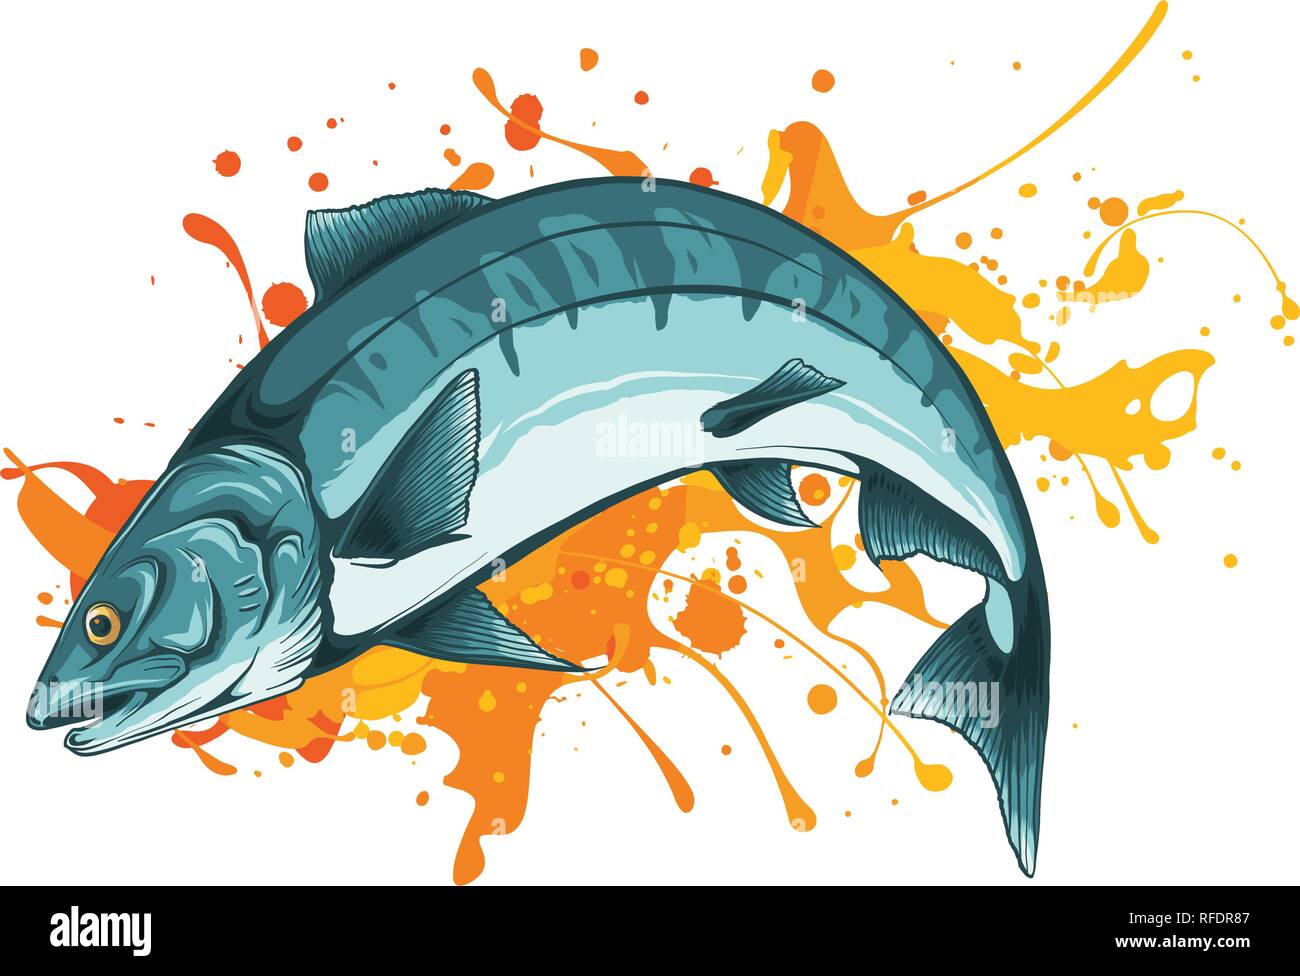 vector illustration salmon fish with color stain Stock Vector